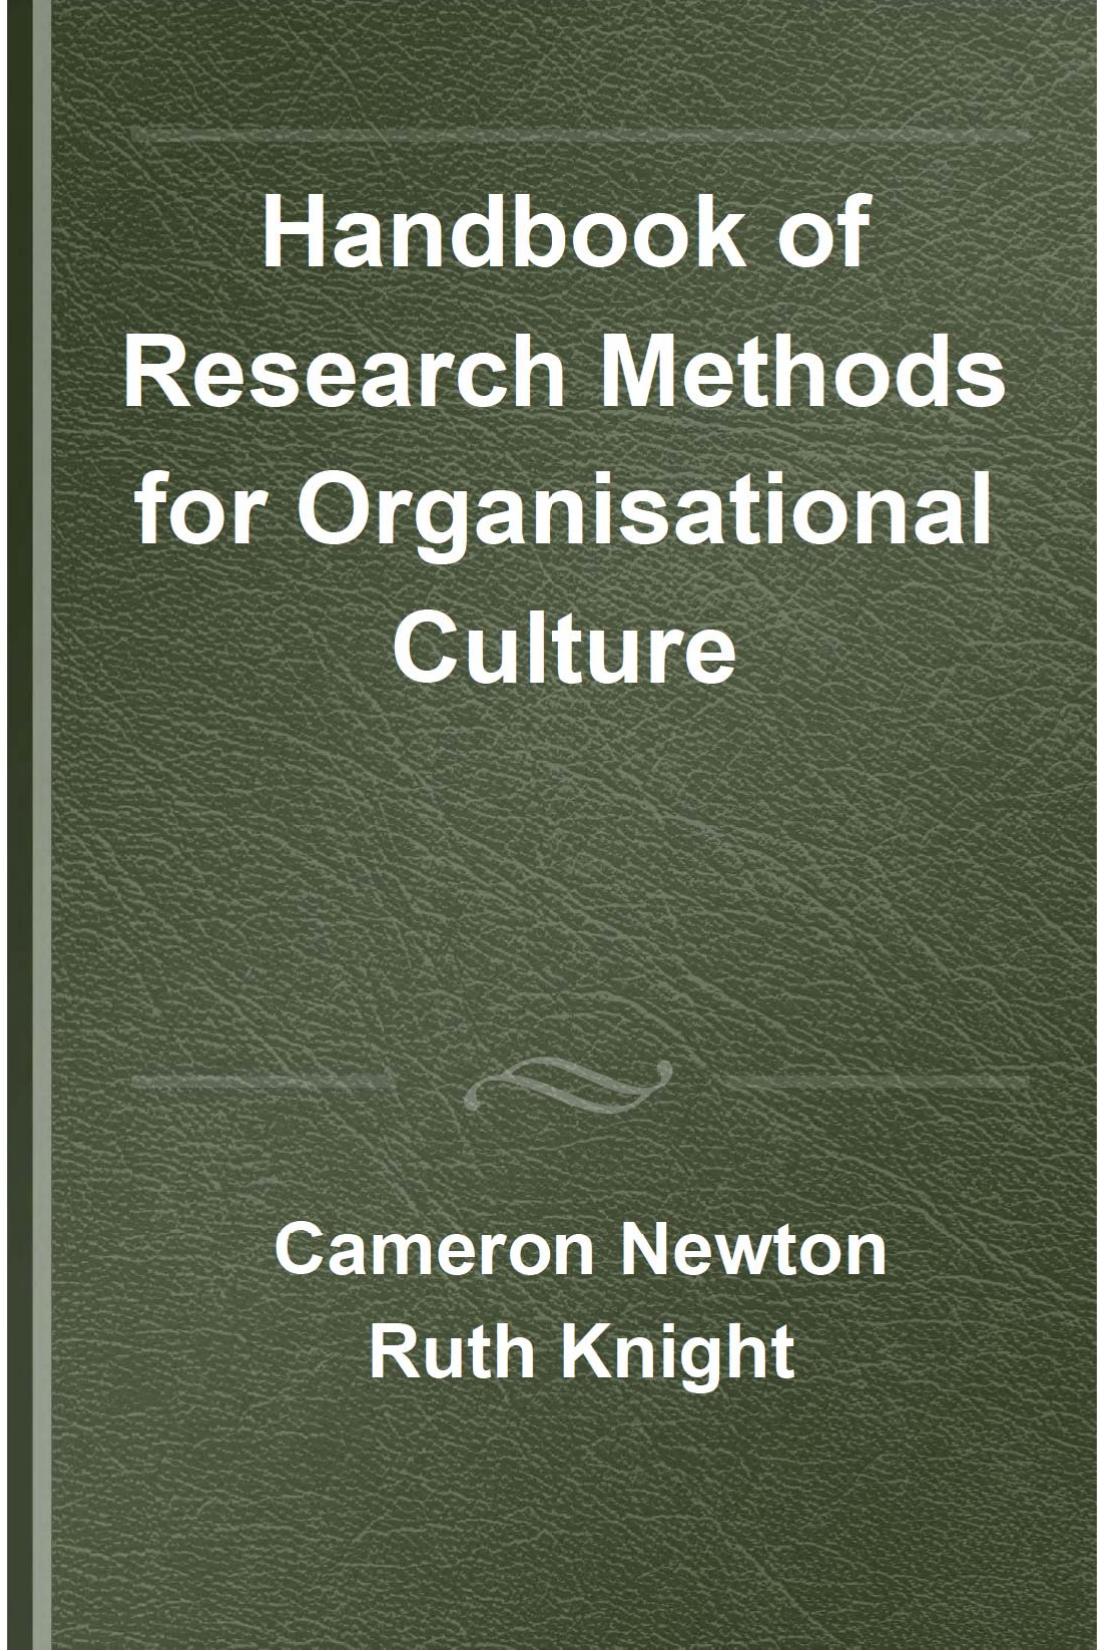 Handbook of Research Methods for Organisational Culture by Cameron Newton Ruth Knight